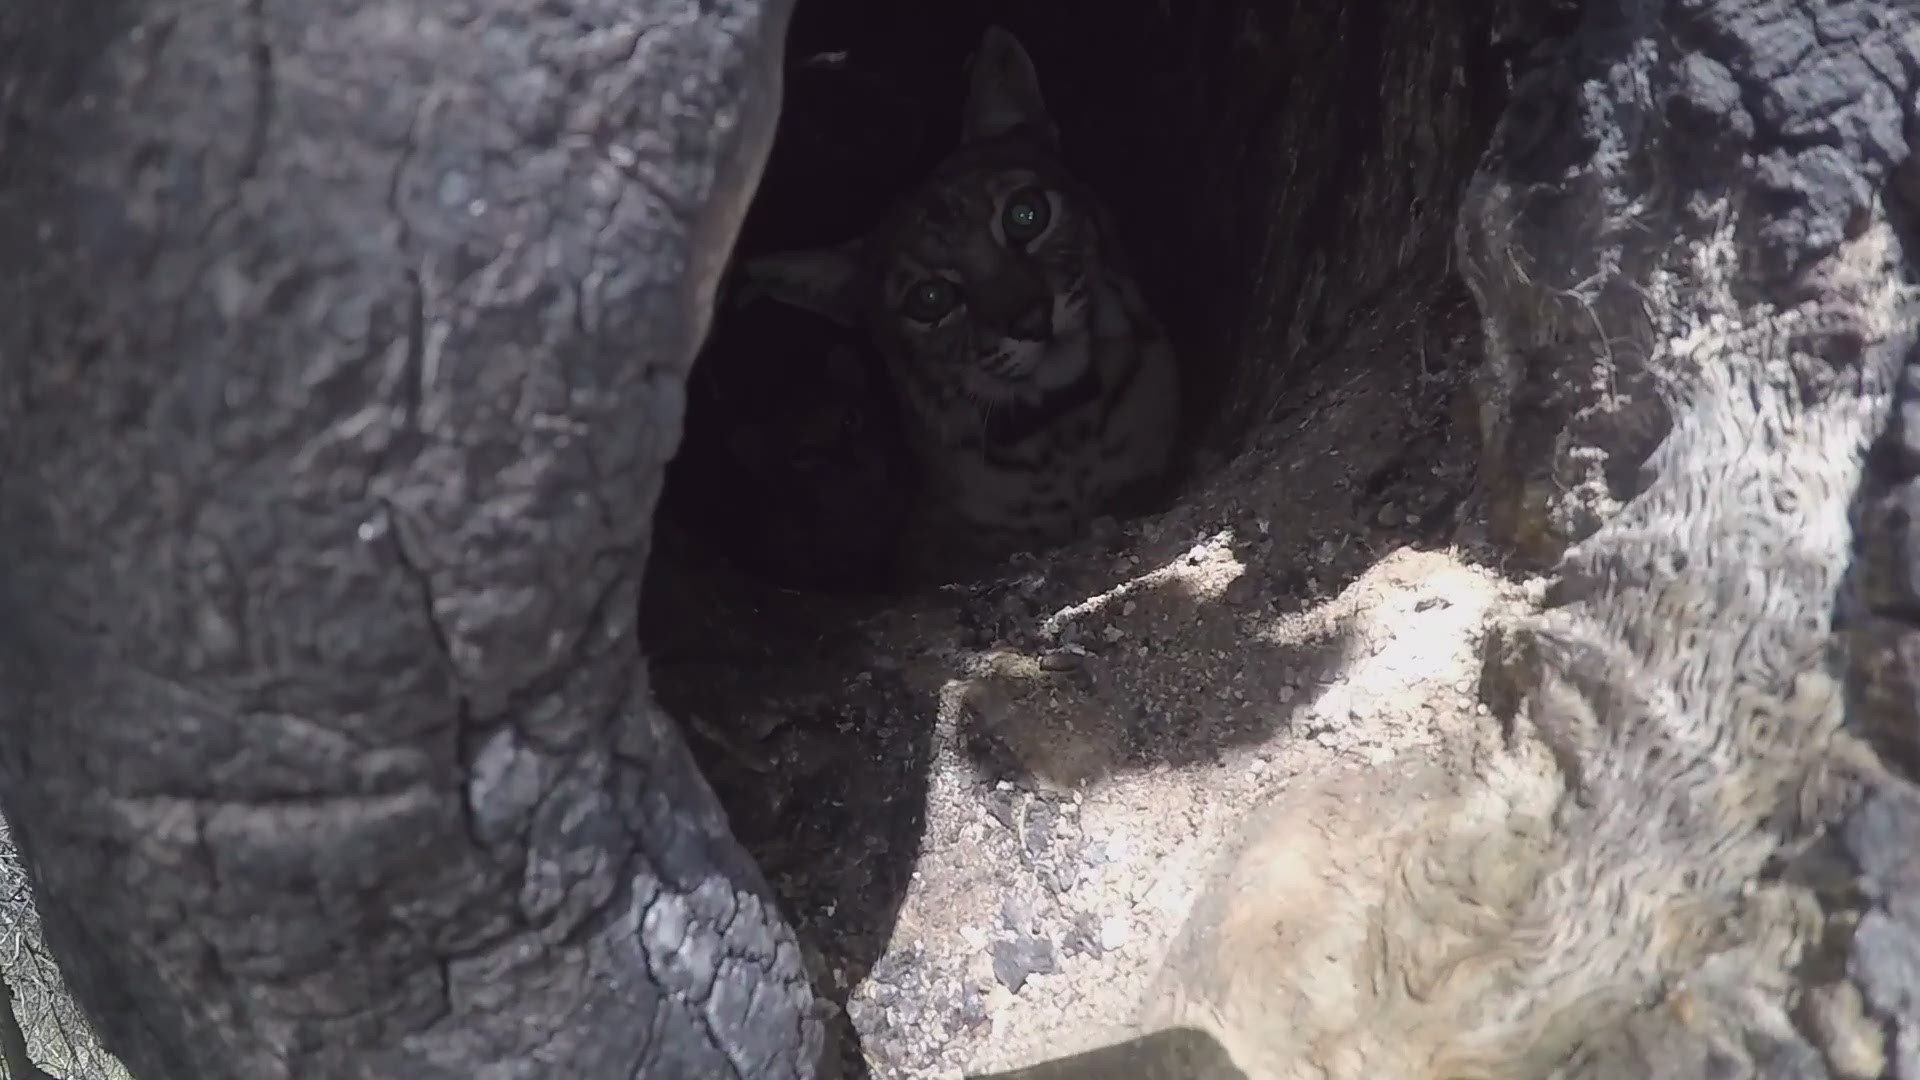 National Park Service biologists located the female bobcat in a cavity of a large oak tree on April 15, 2021.